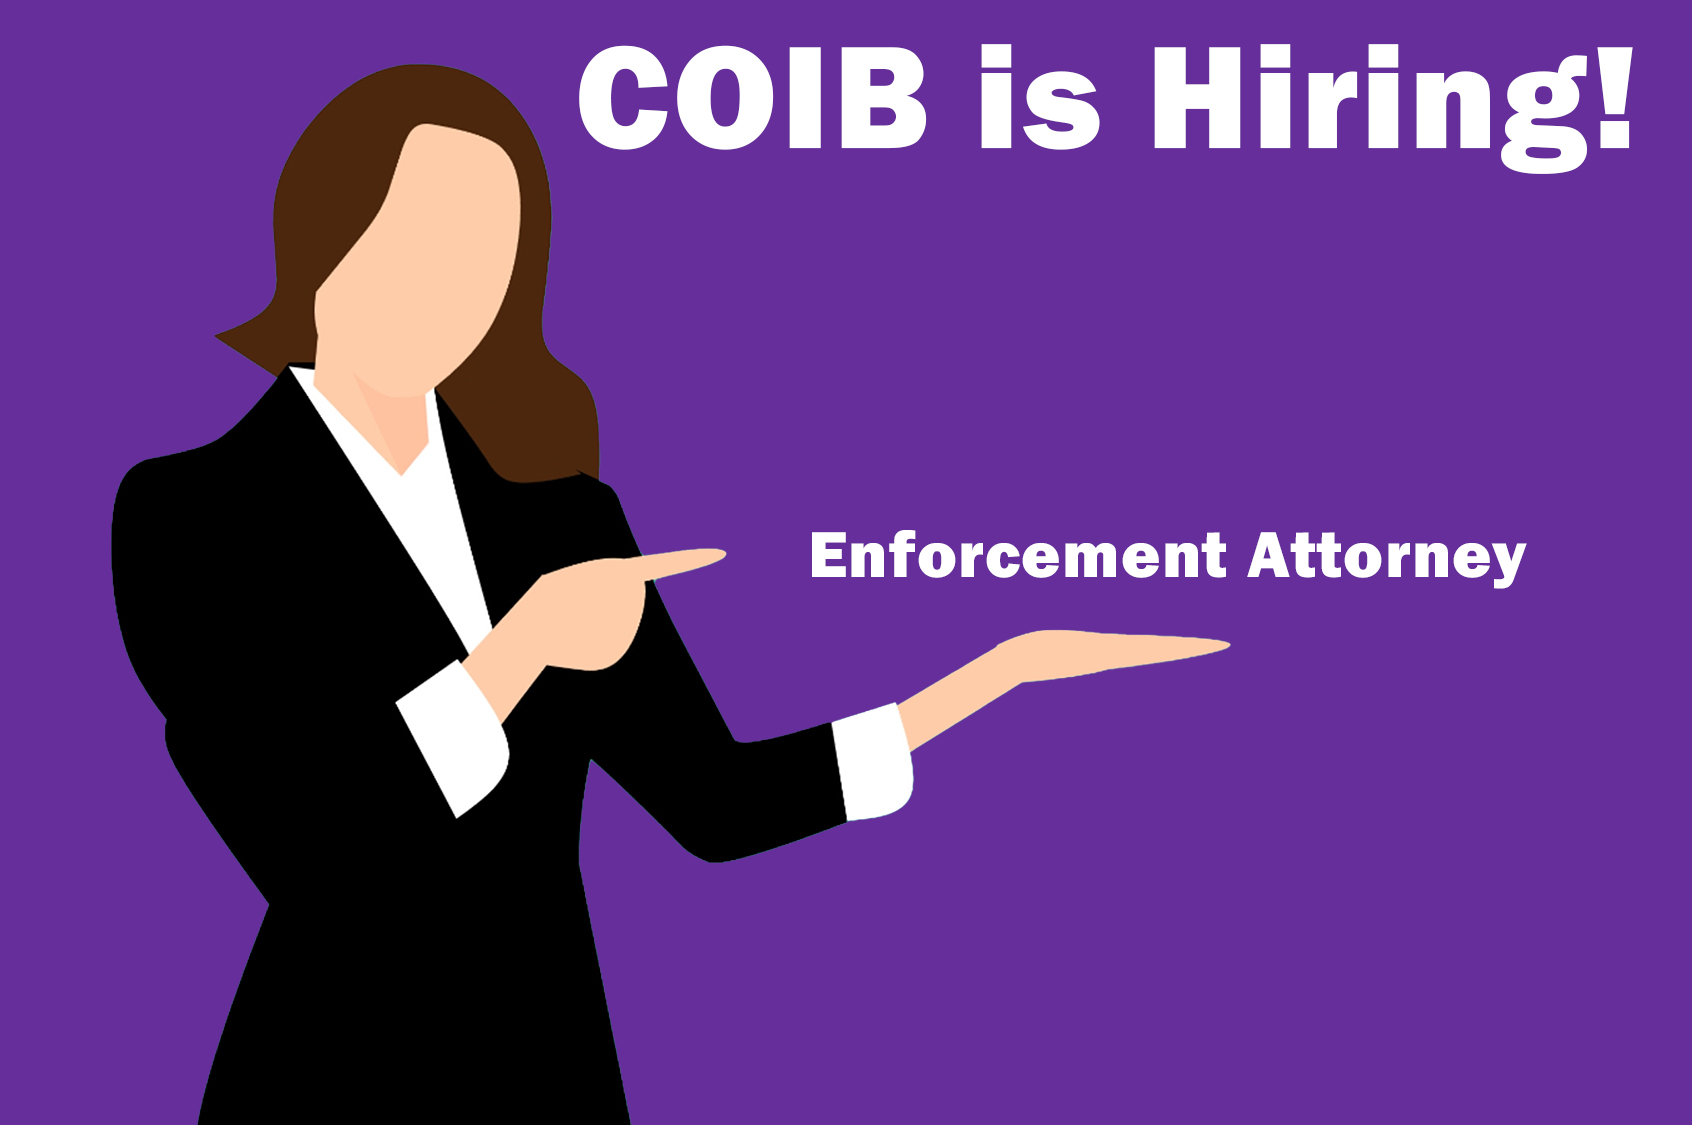 COIB is hiring an enforcement attorney.
                                           